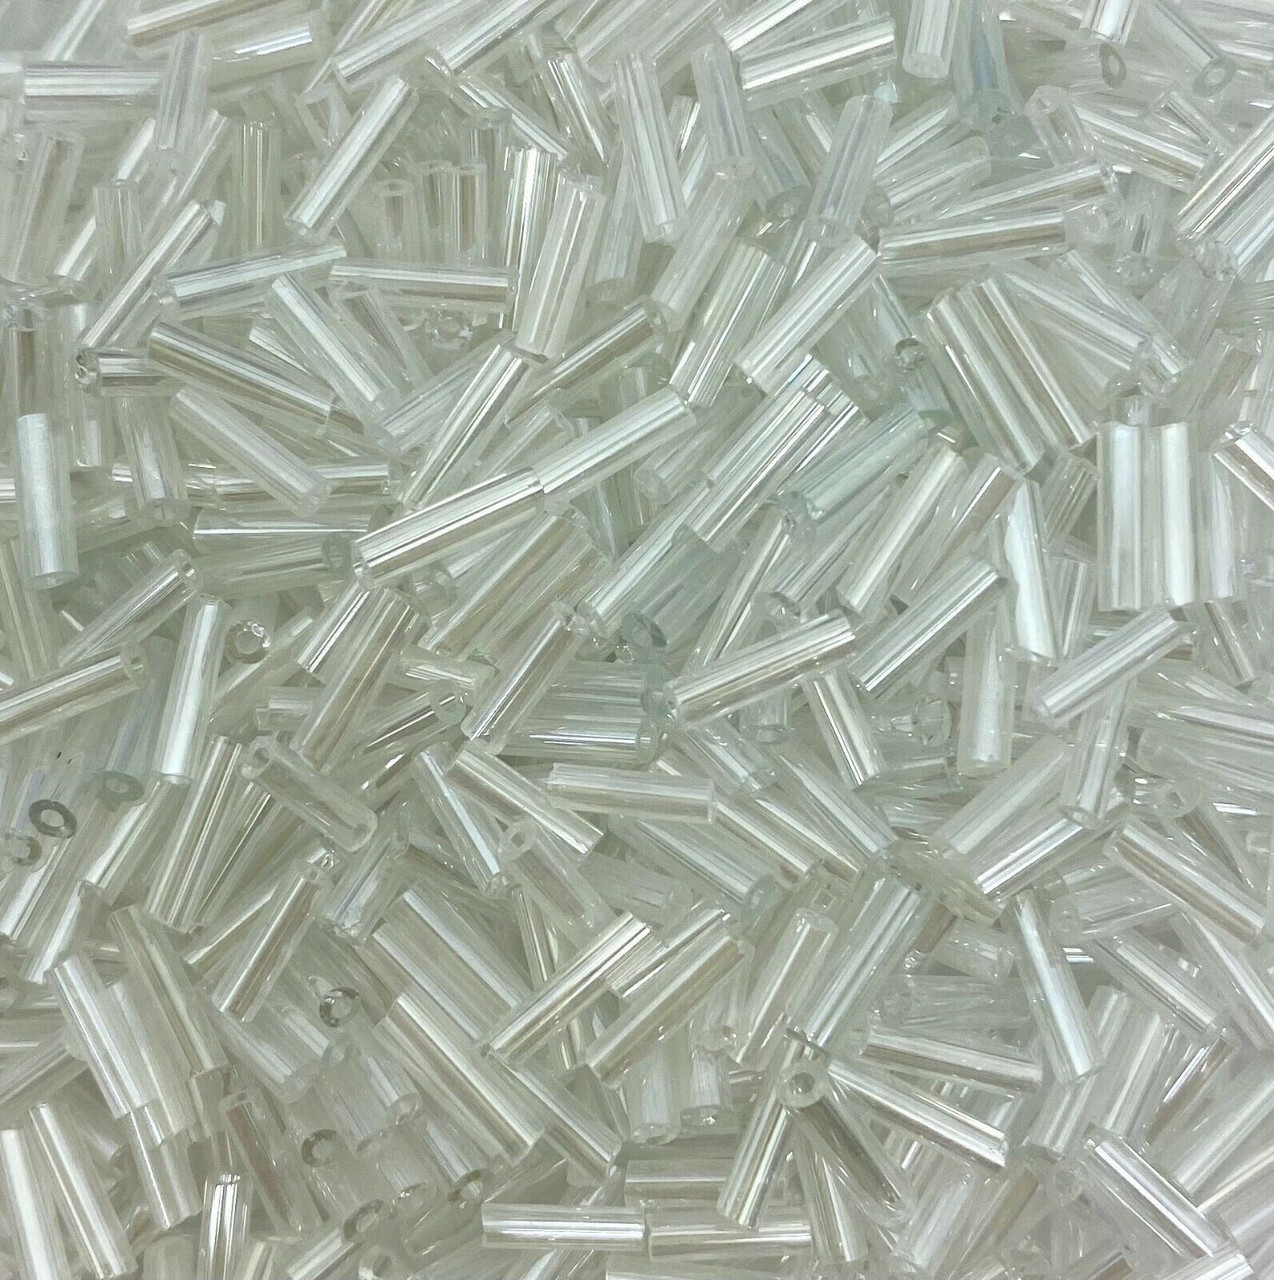 50g glass bugle beads - White Transparent Lustred - 6mm tubes, jewellery making